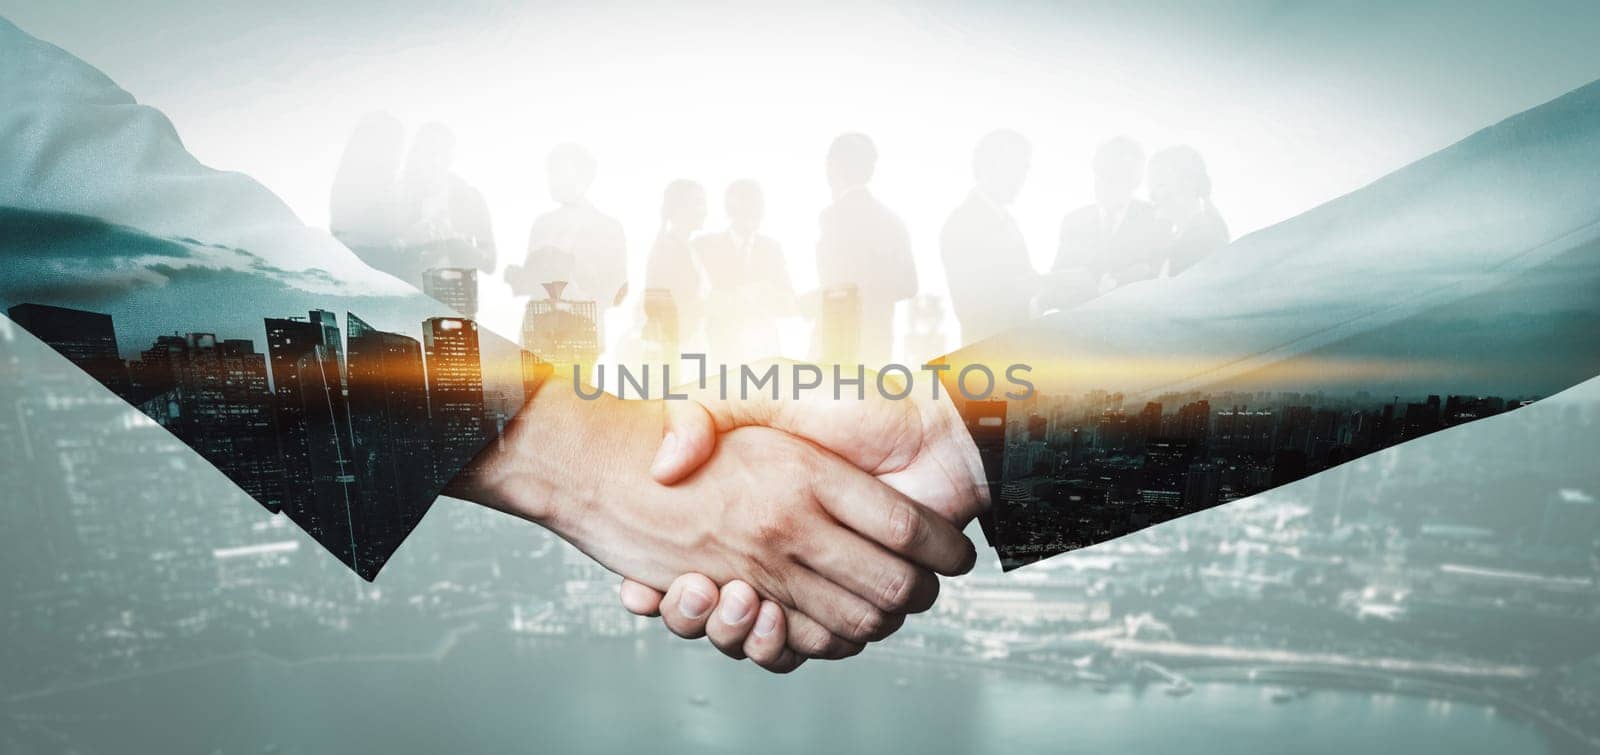 Double Exposure Image of Business and Finance uds by biancoblue